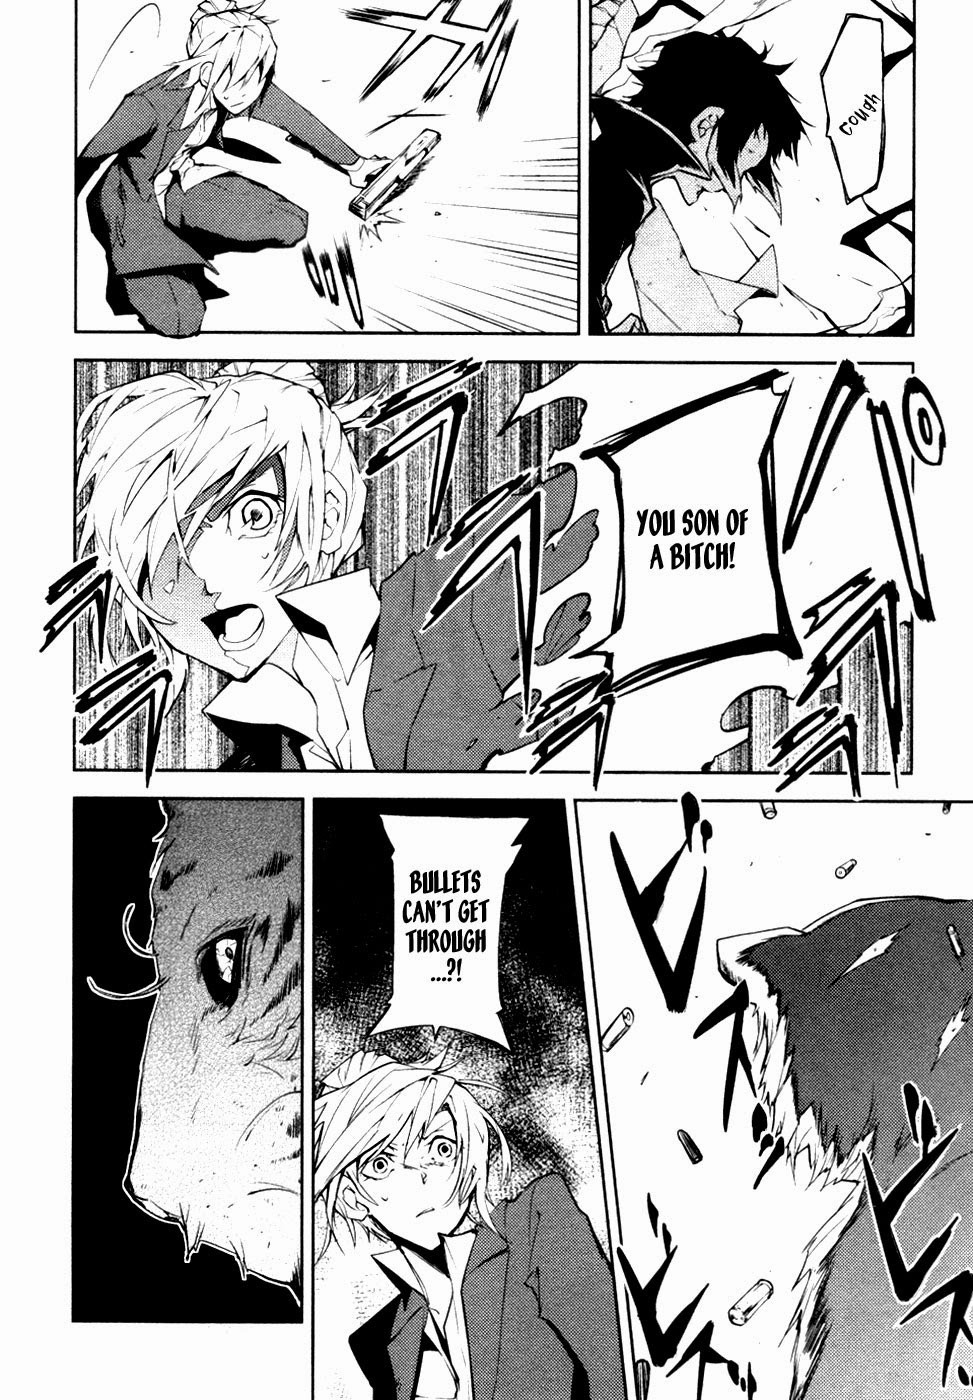 Bungo Stray Dogs chapter 4 page 38